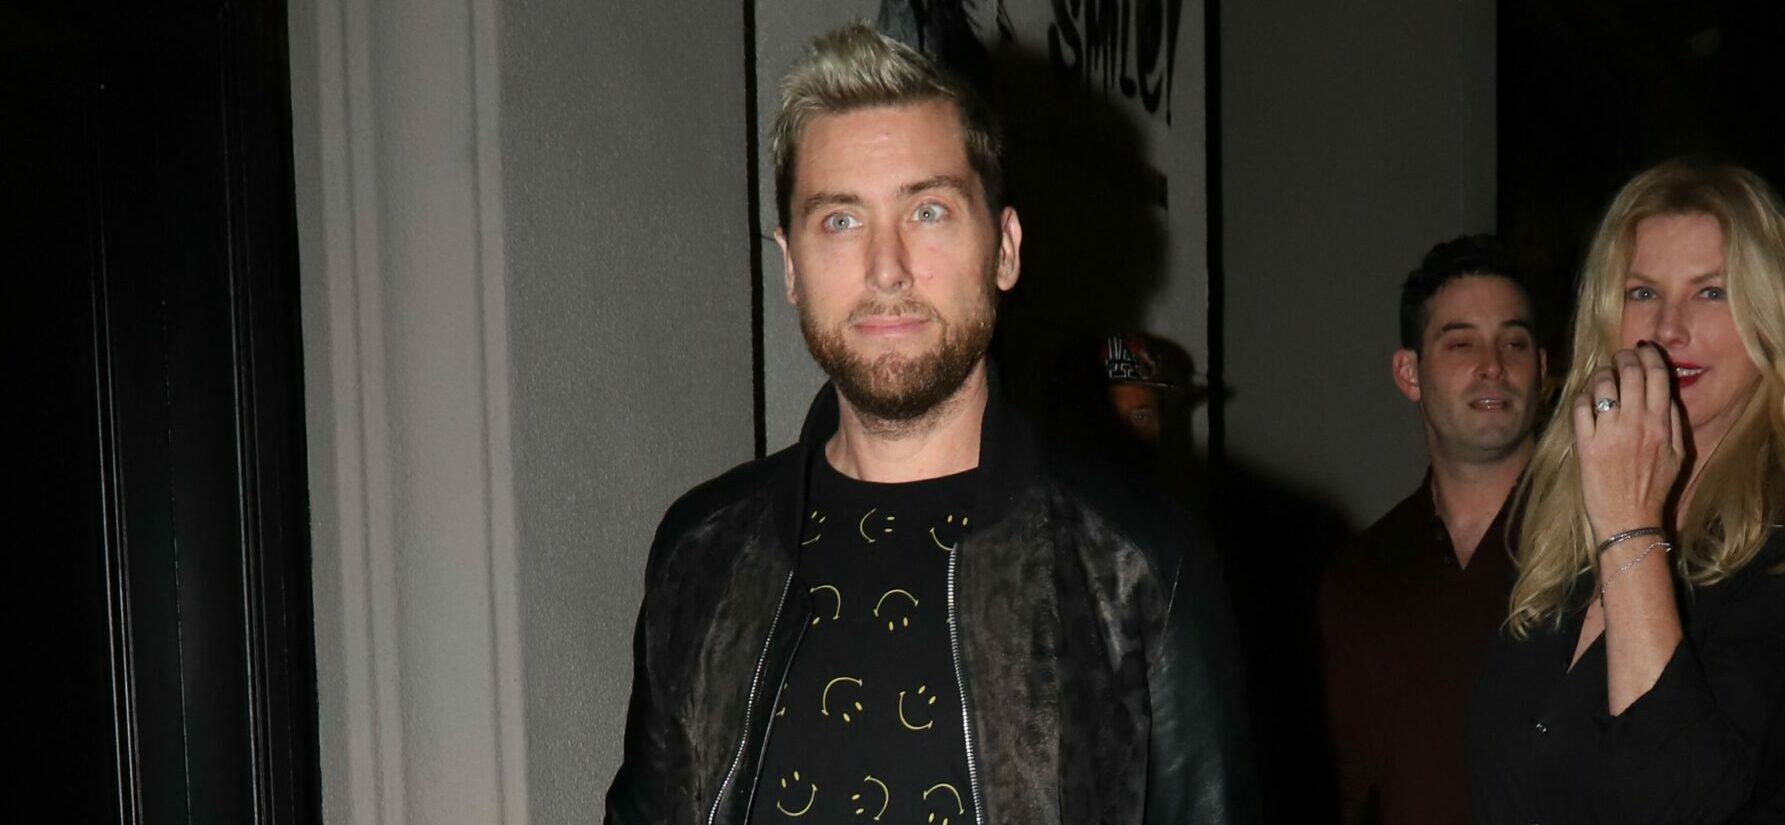 Lance Bass seen with husband and friends going to Craig apos s for dinner